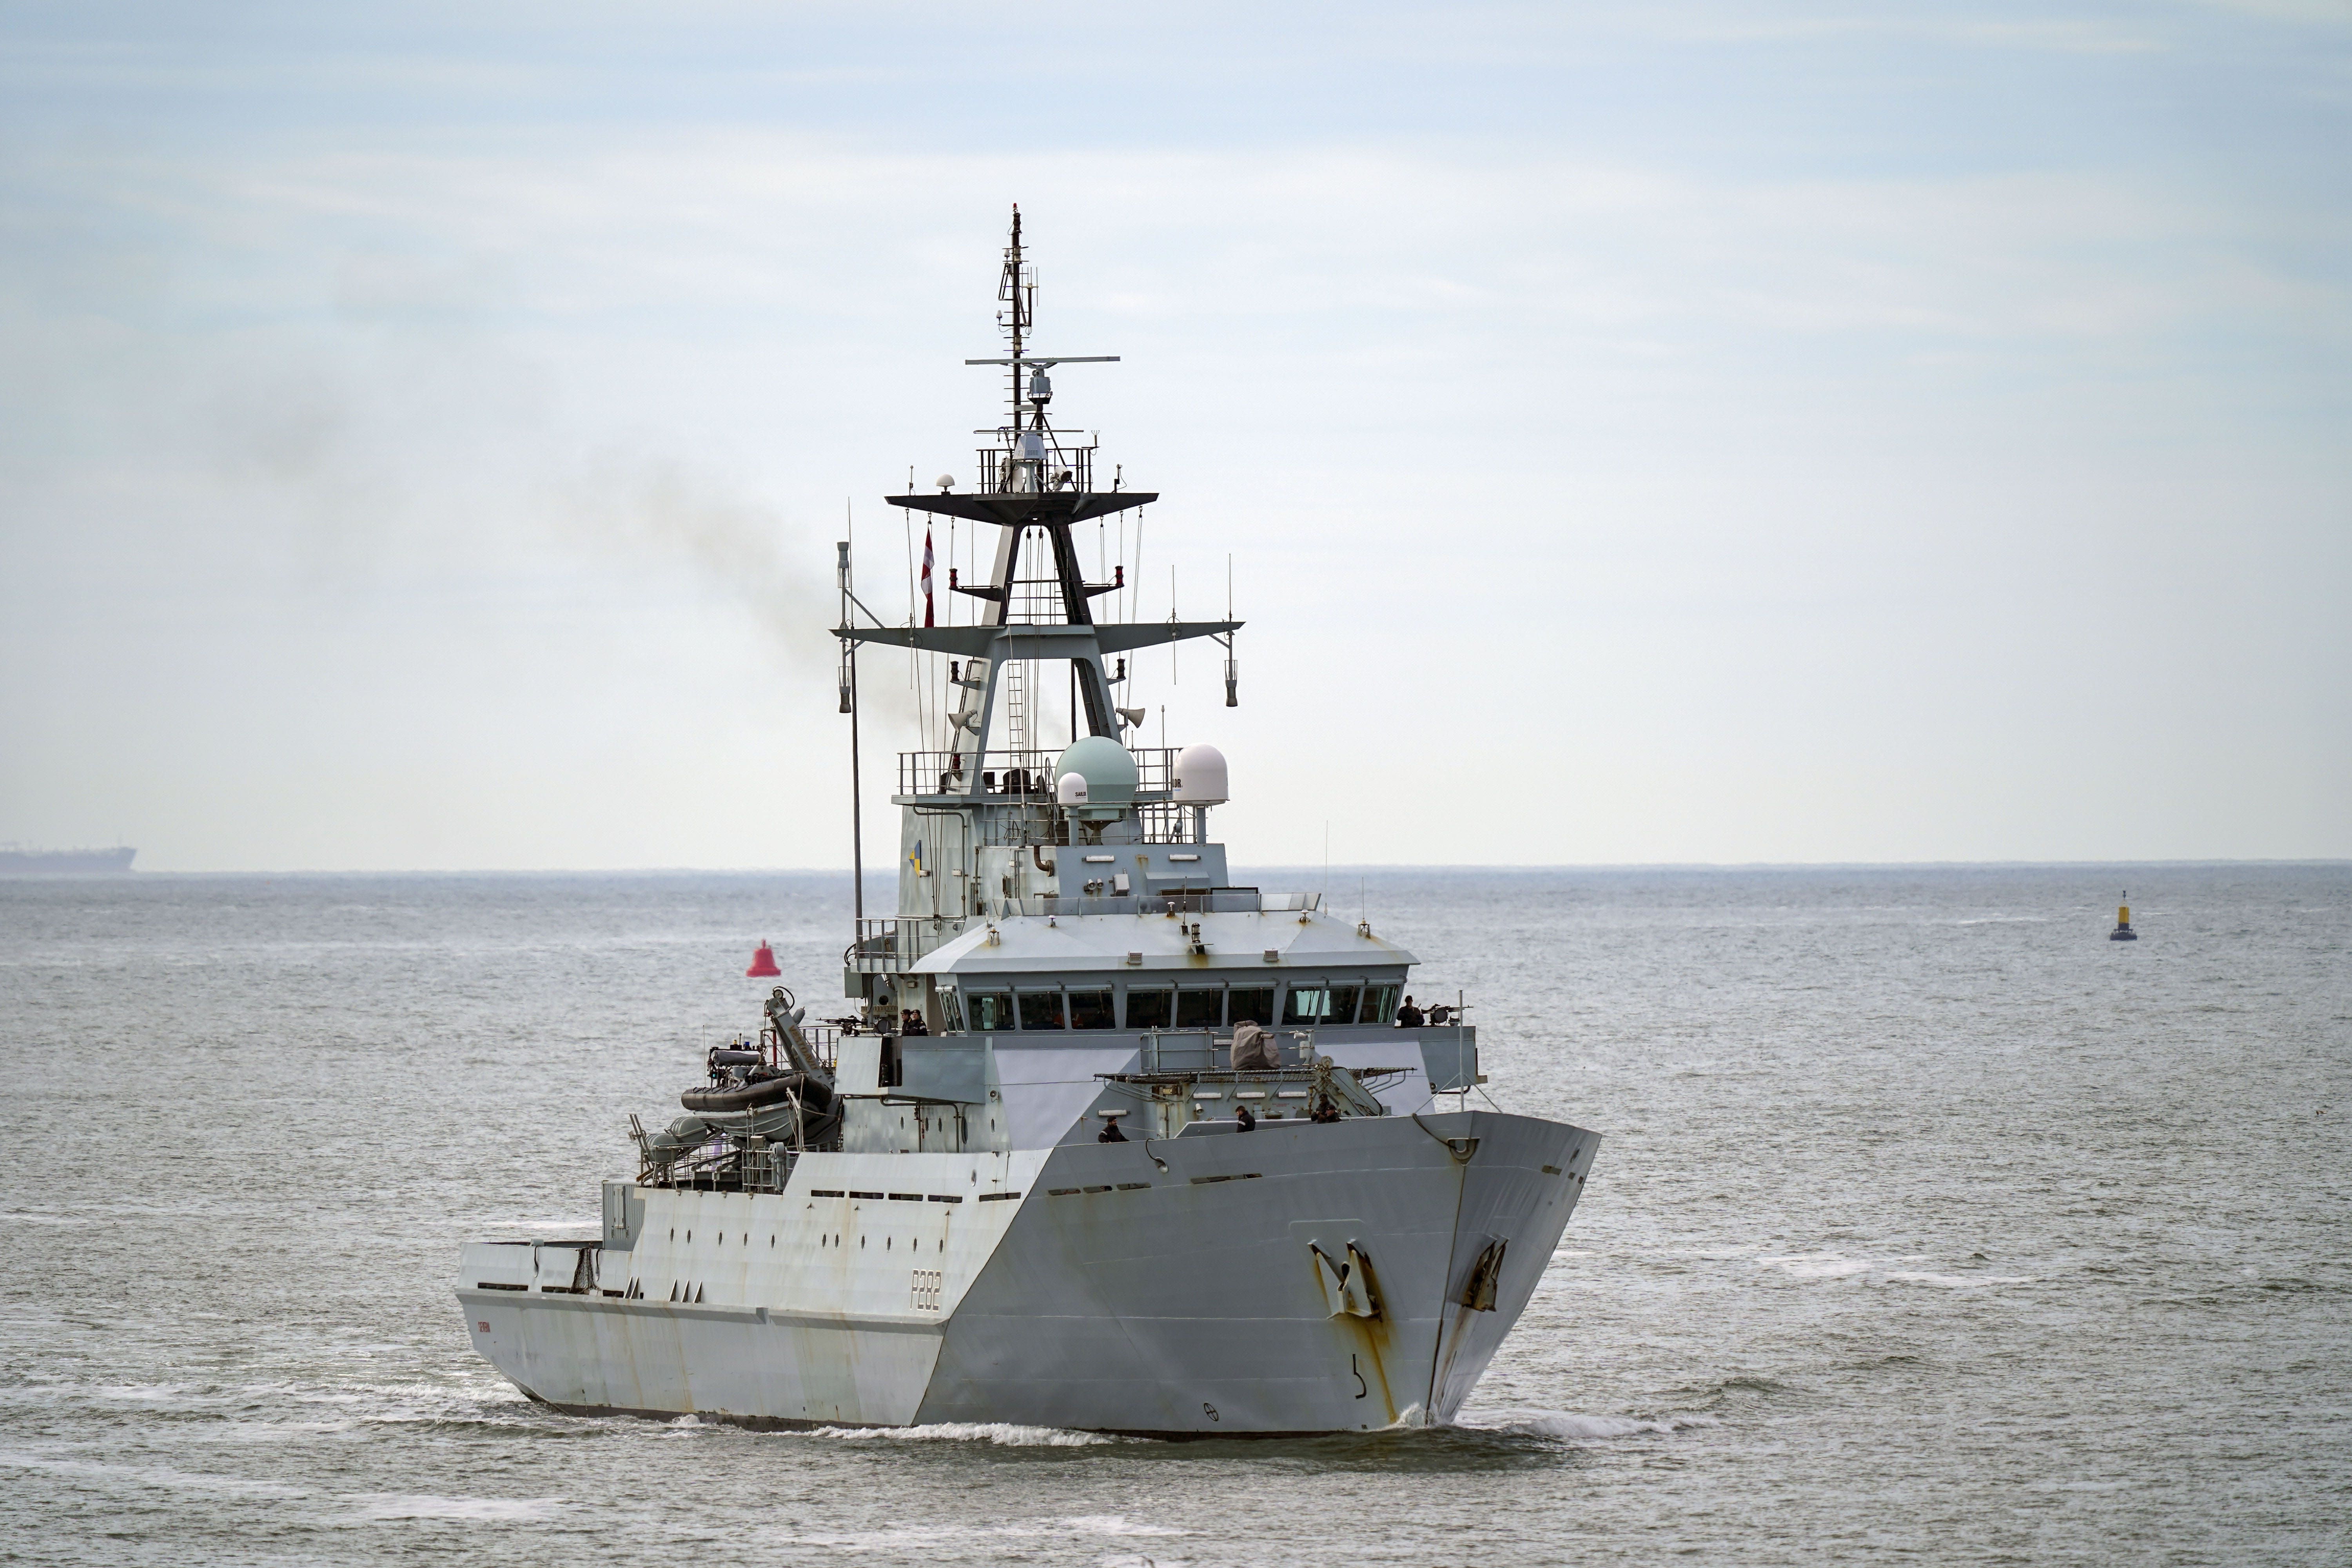 Naval ships including HMS ‘Severn’ were in the response to Wednesday’s boat tragedy